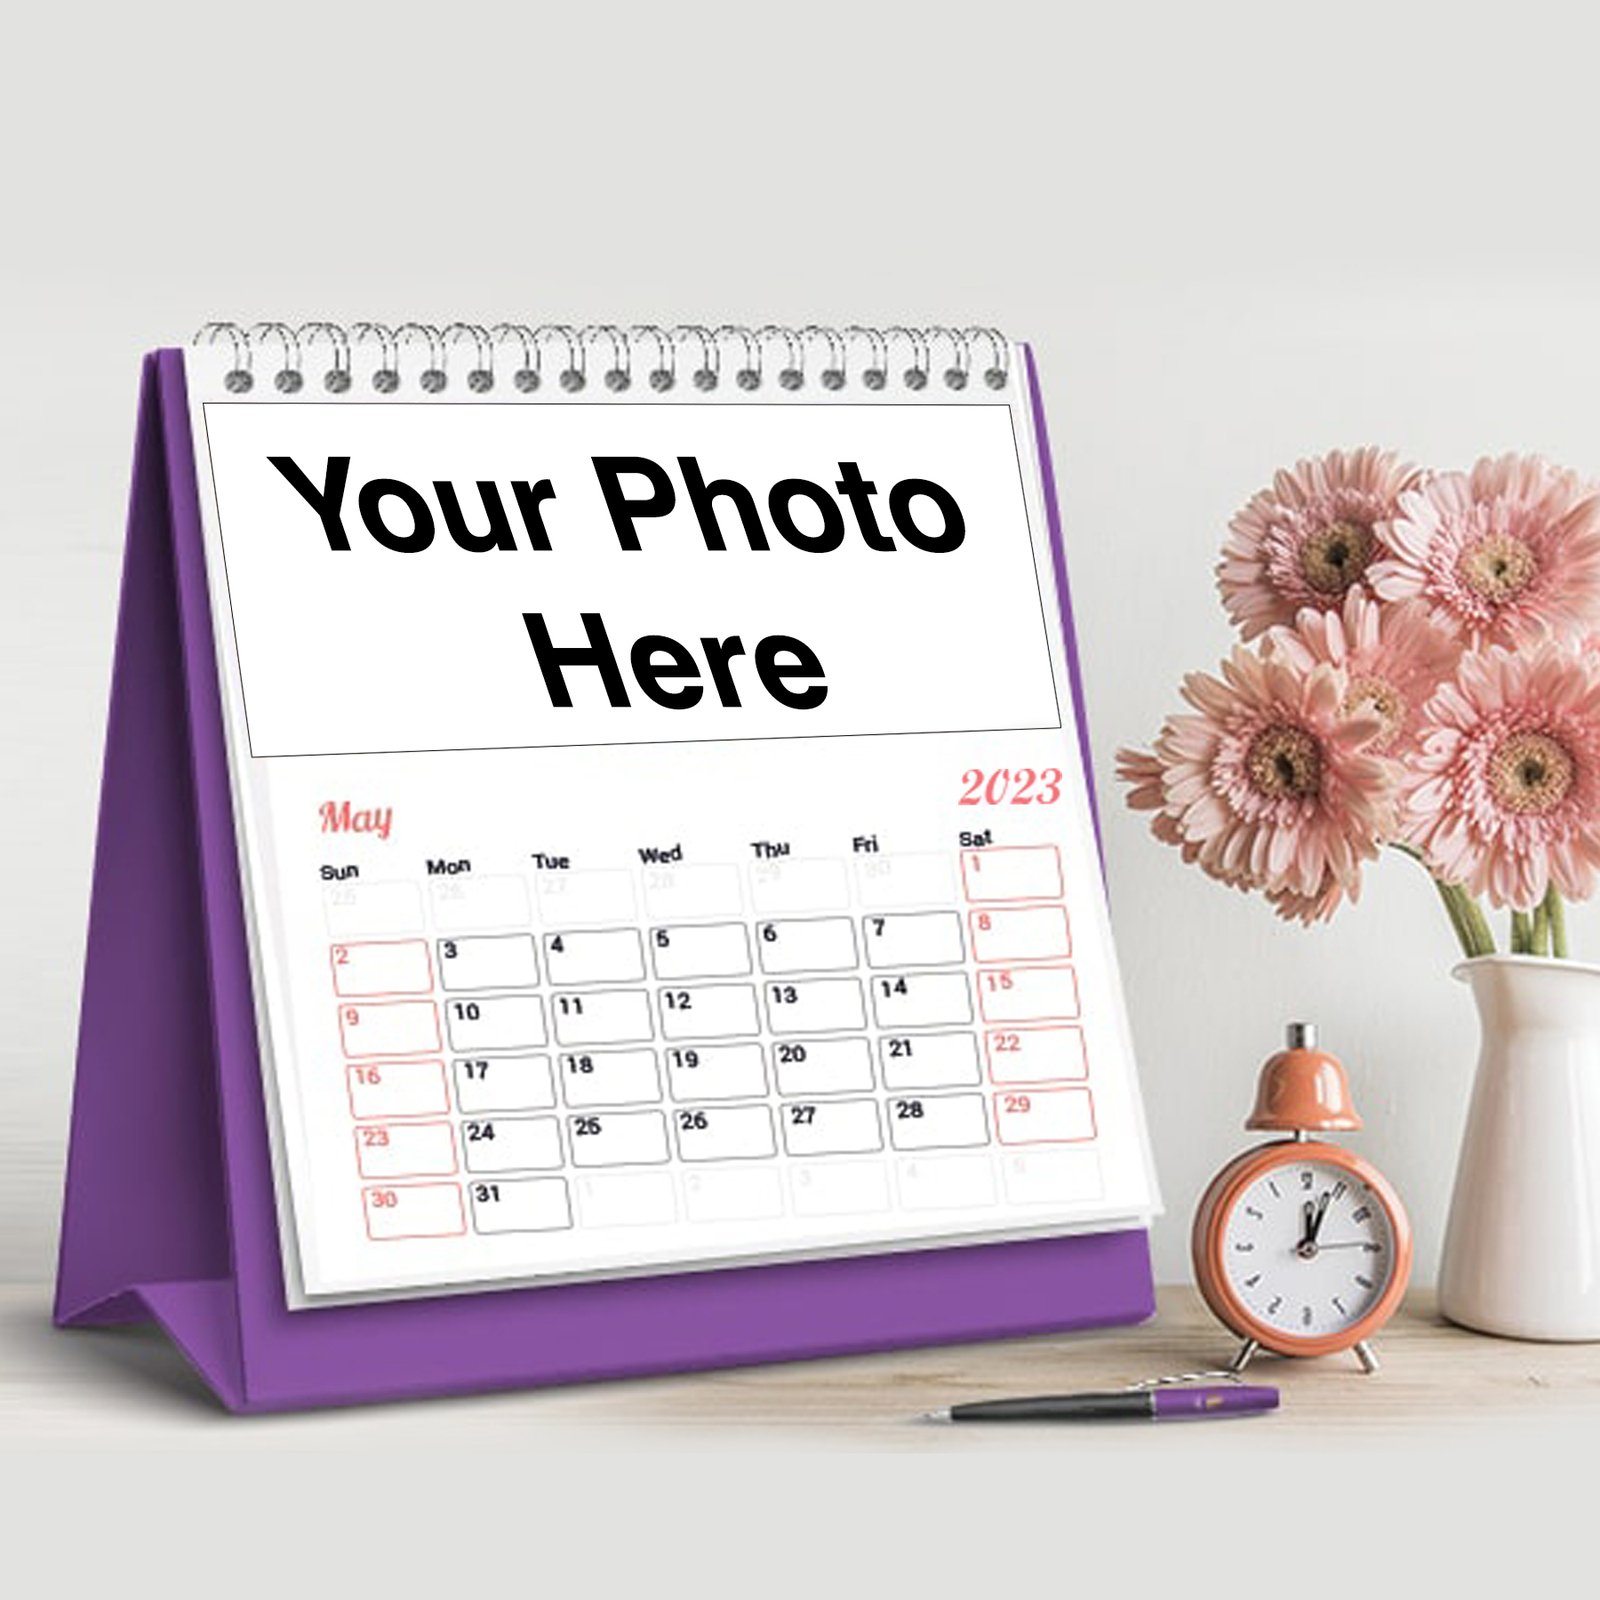 Personalized%20Photo%20Calendar%20(2)%20 %20A%20Perfect%20Gifter